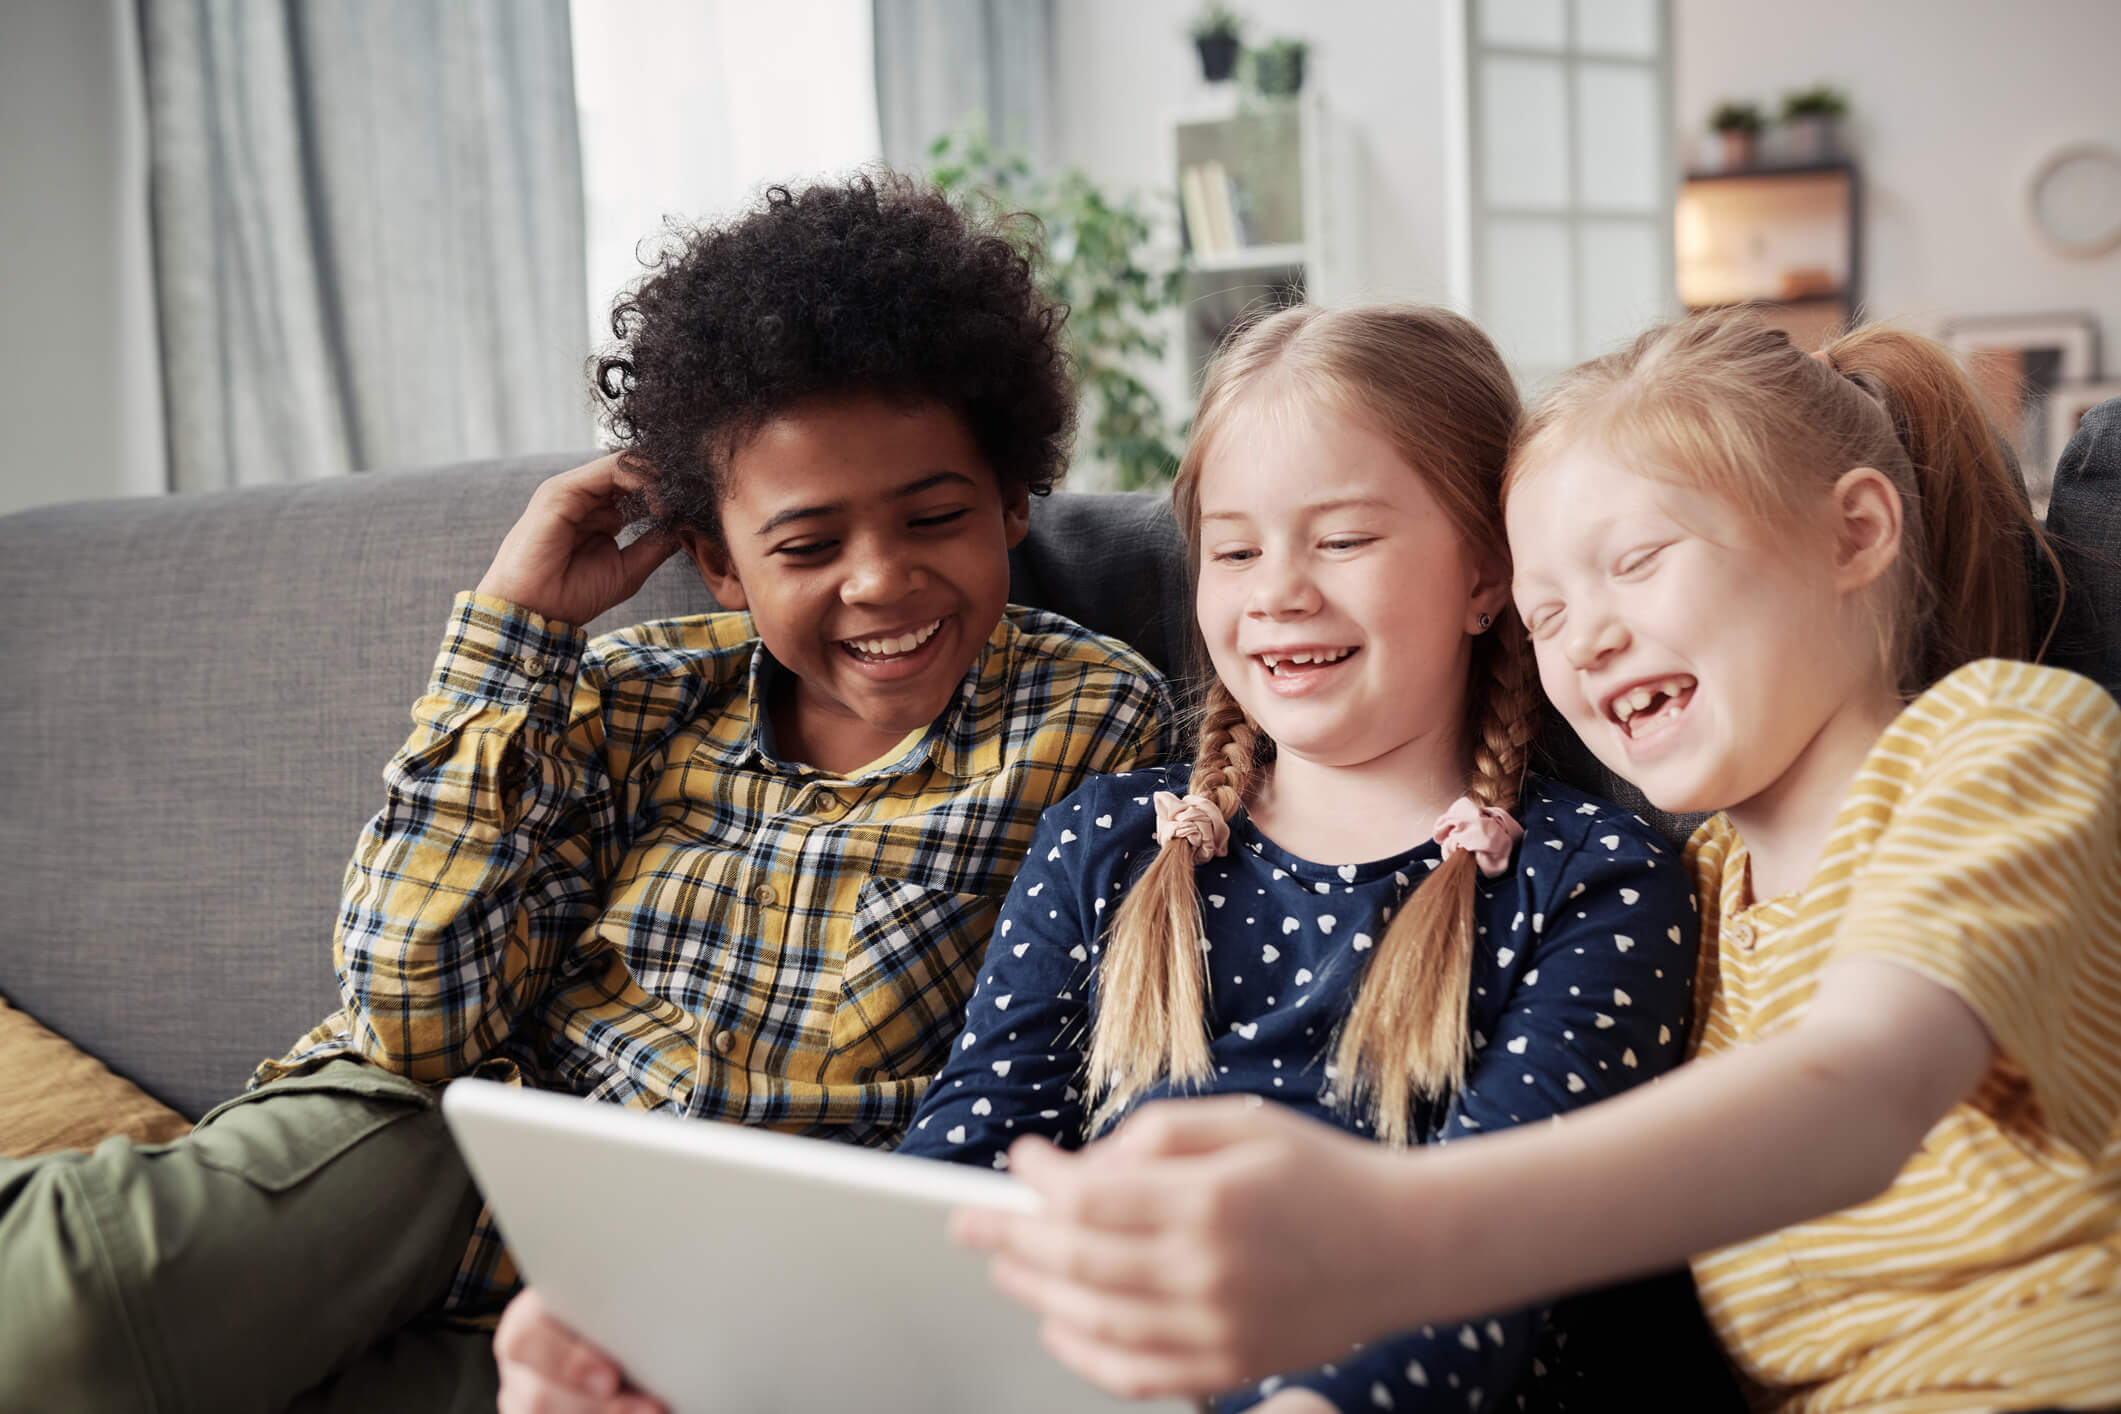 Three children are sitting on a couch together and looking at a tablet screen; they are all laughing and smiling.